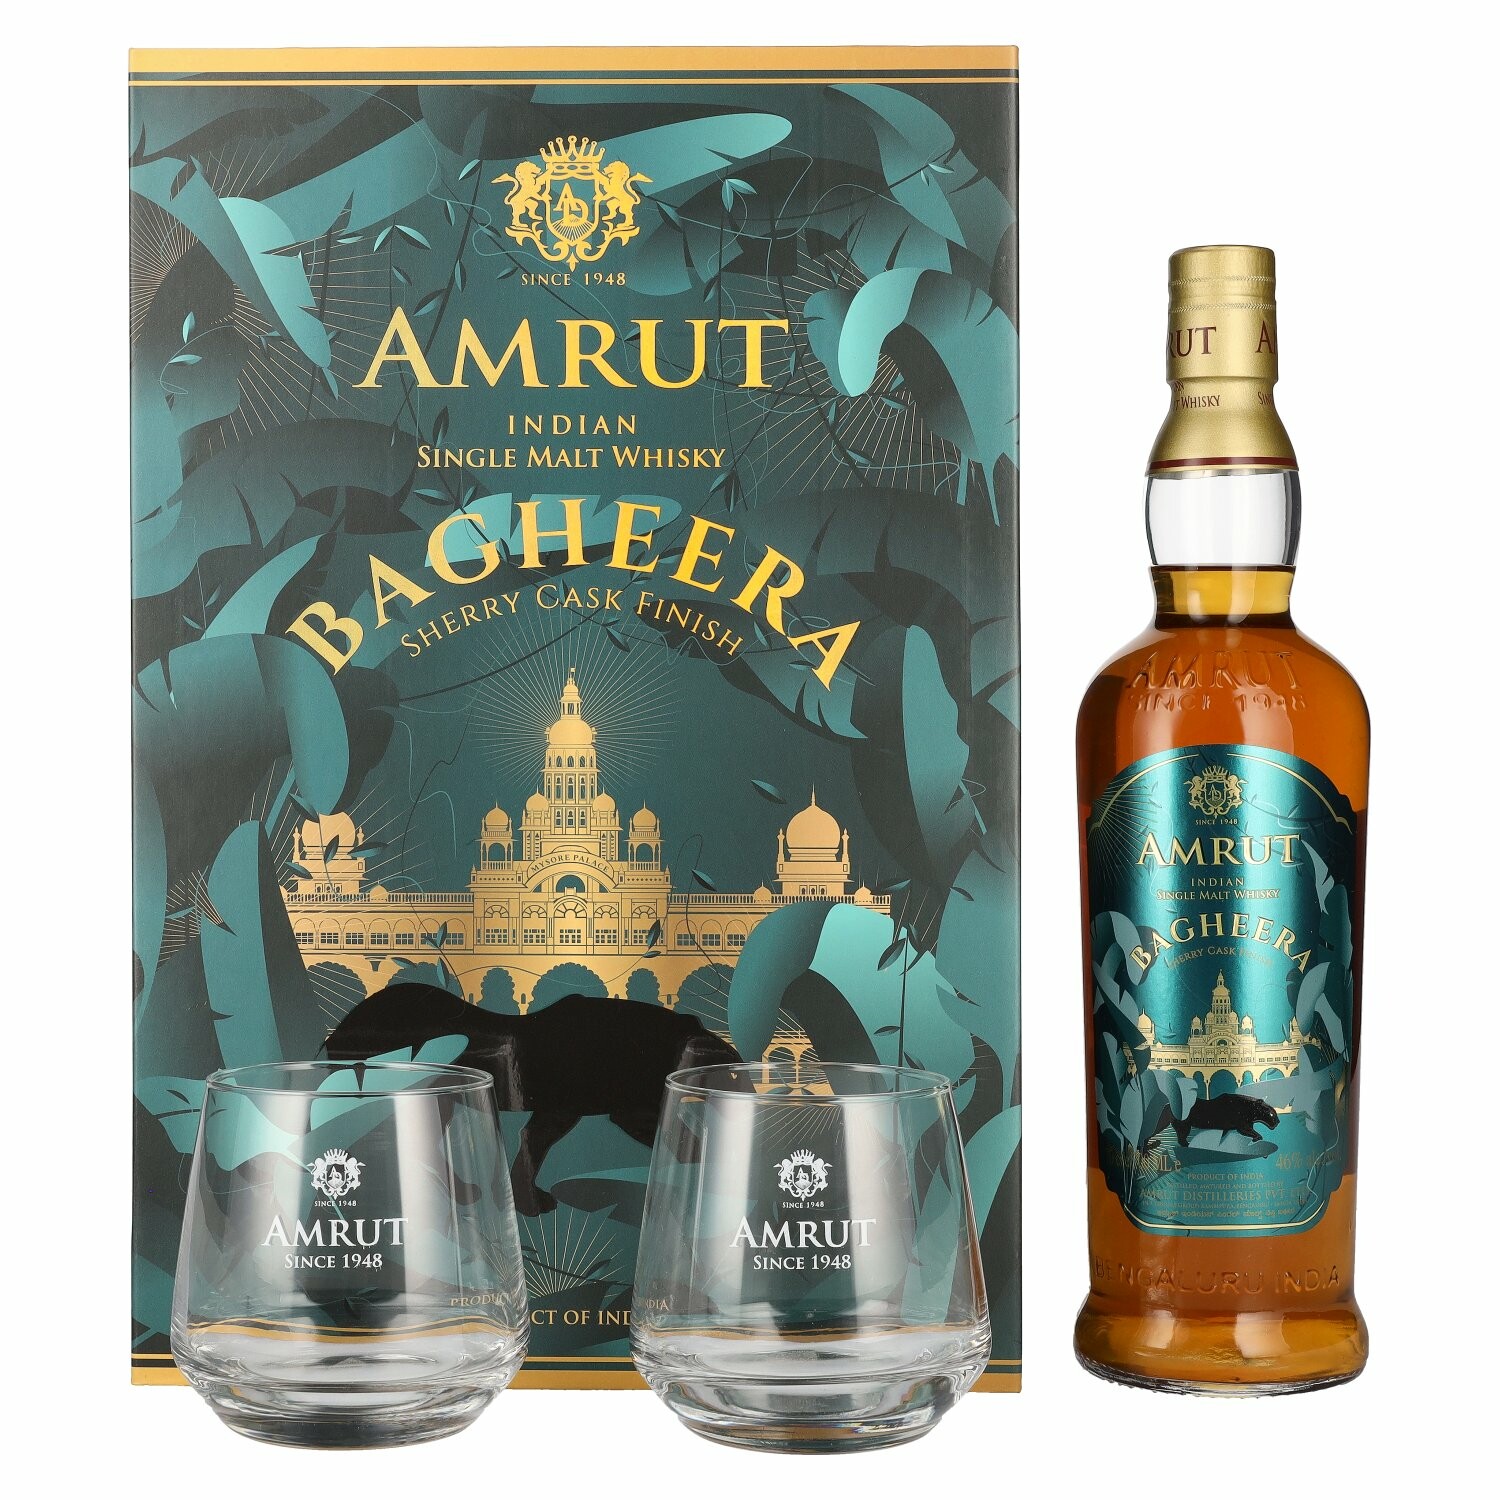 Amrut BAGHEERA Indian Single Malt Whisky Sherry Cask Finish 46% Vol. 0,7l in Giftbox with 2 glasses